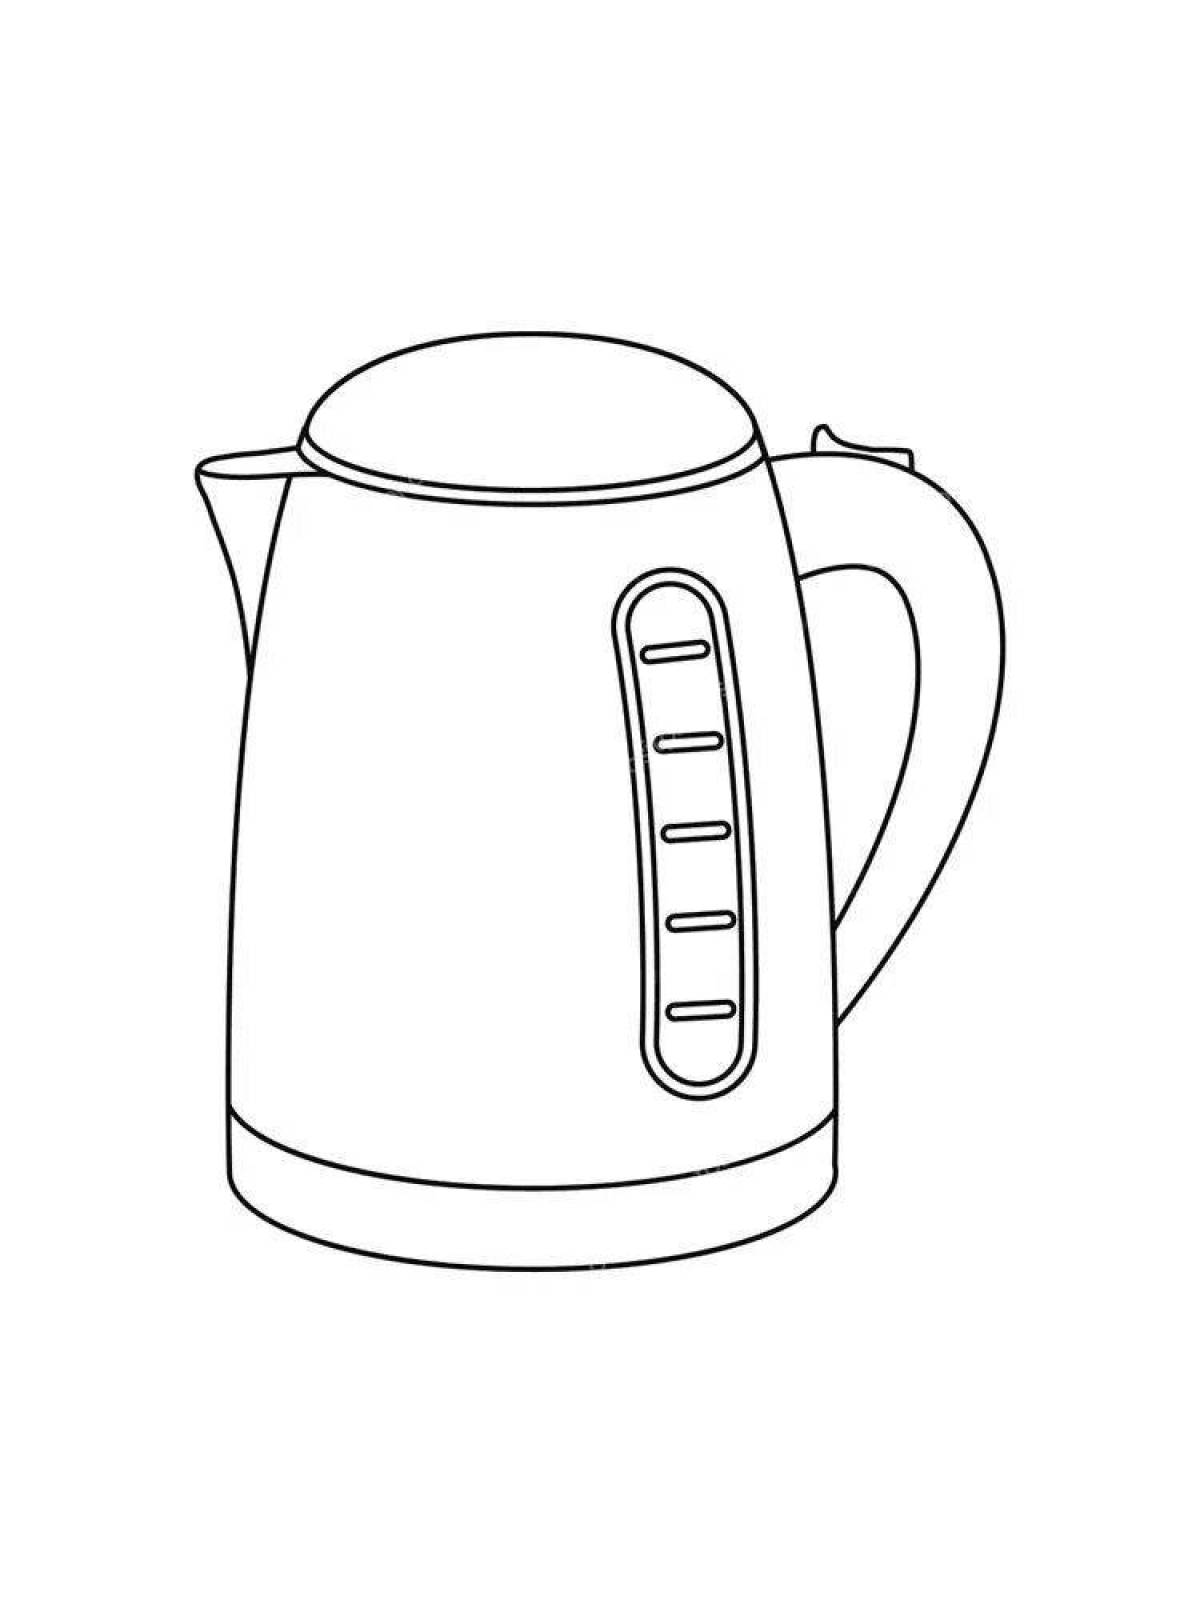 Sparkling electric kettle coloring page